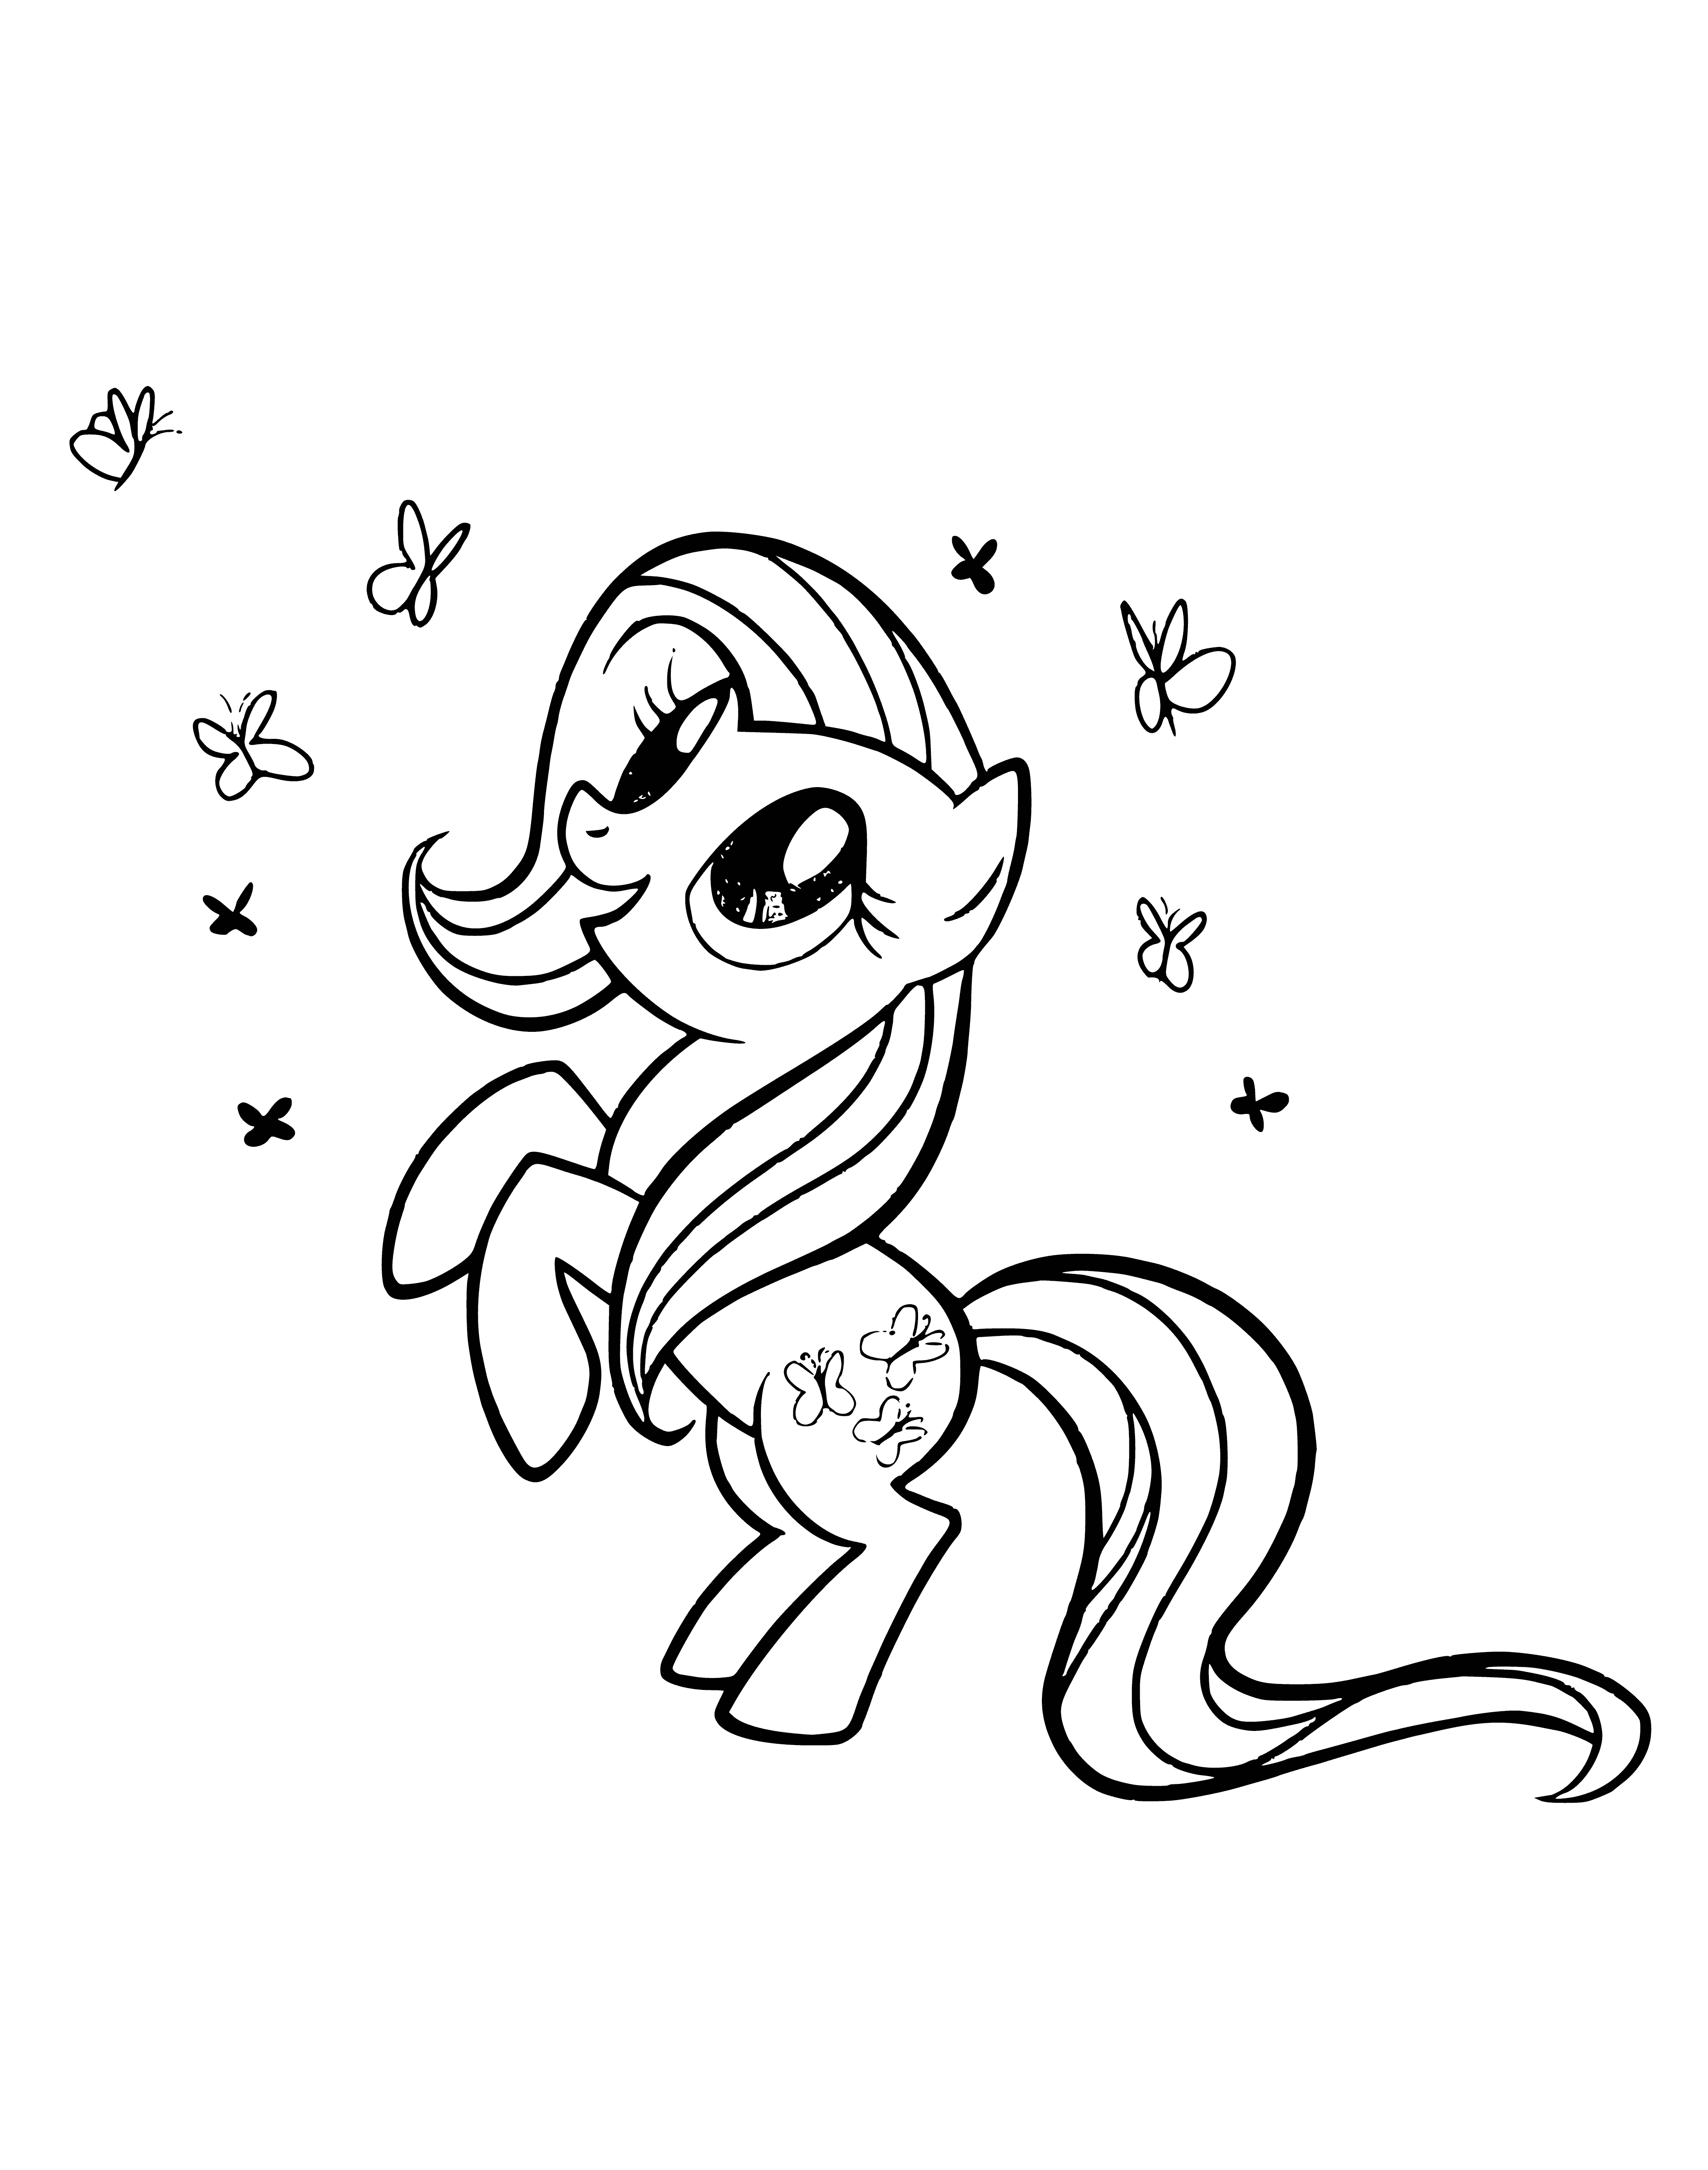 Fluttershy, a serene pony, admires butterflies in a forest with tall trees & a stream. A perfect coloring page for MLP fans!